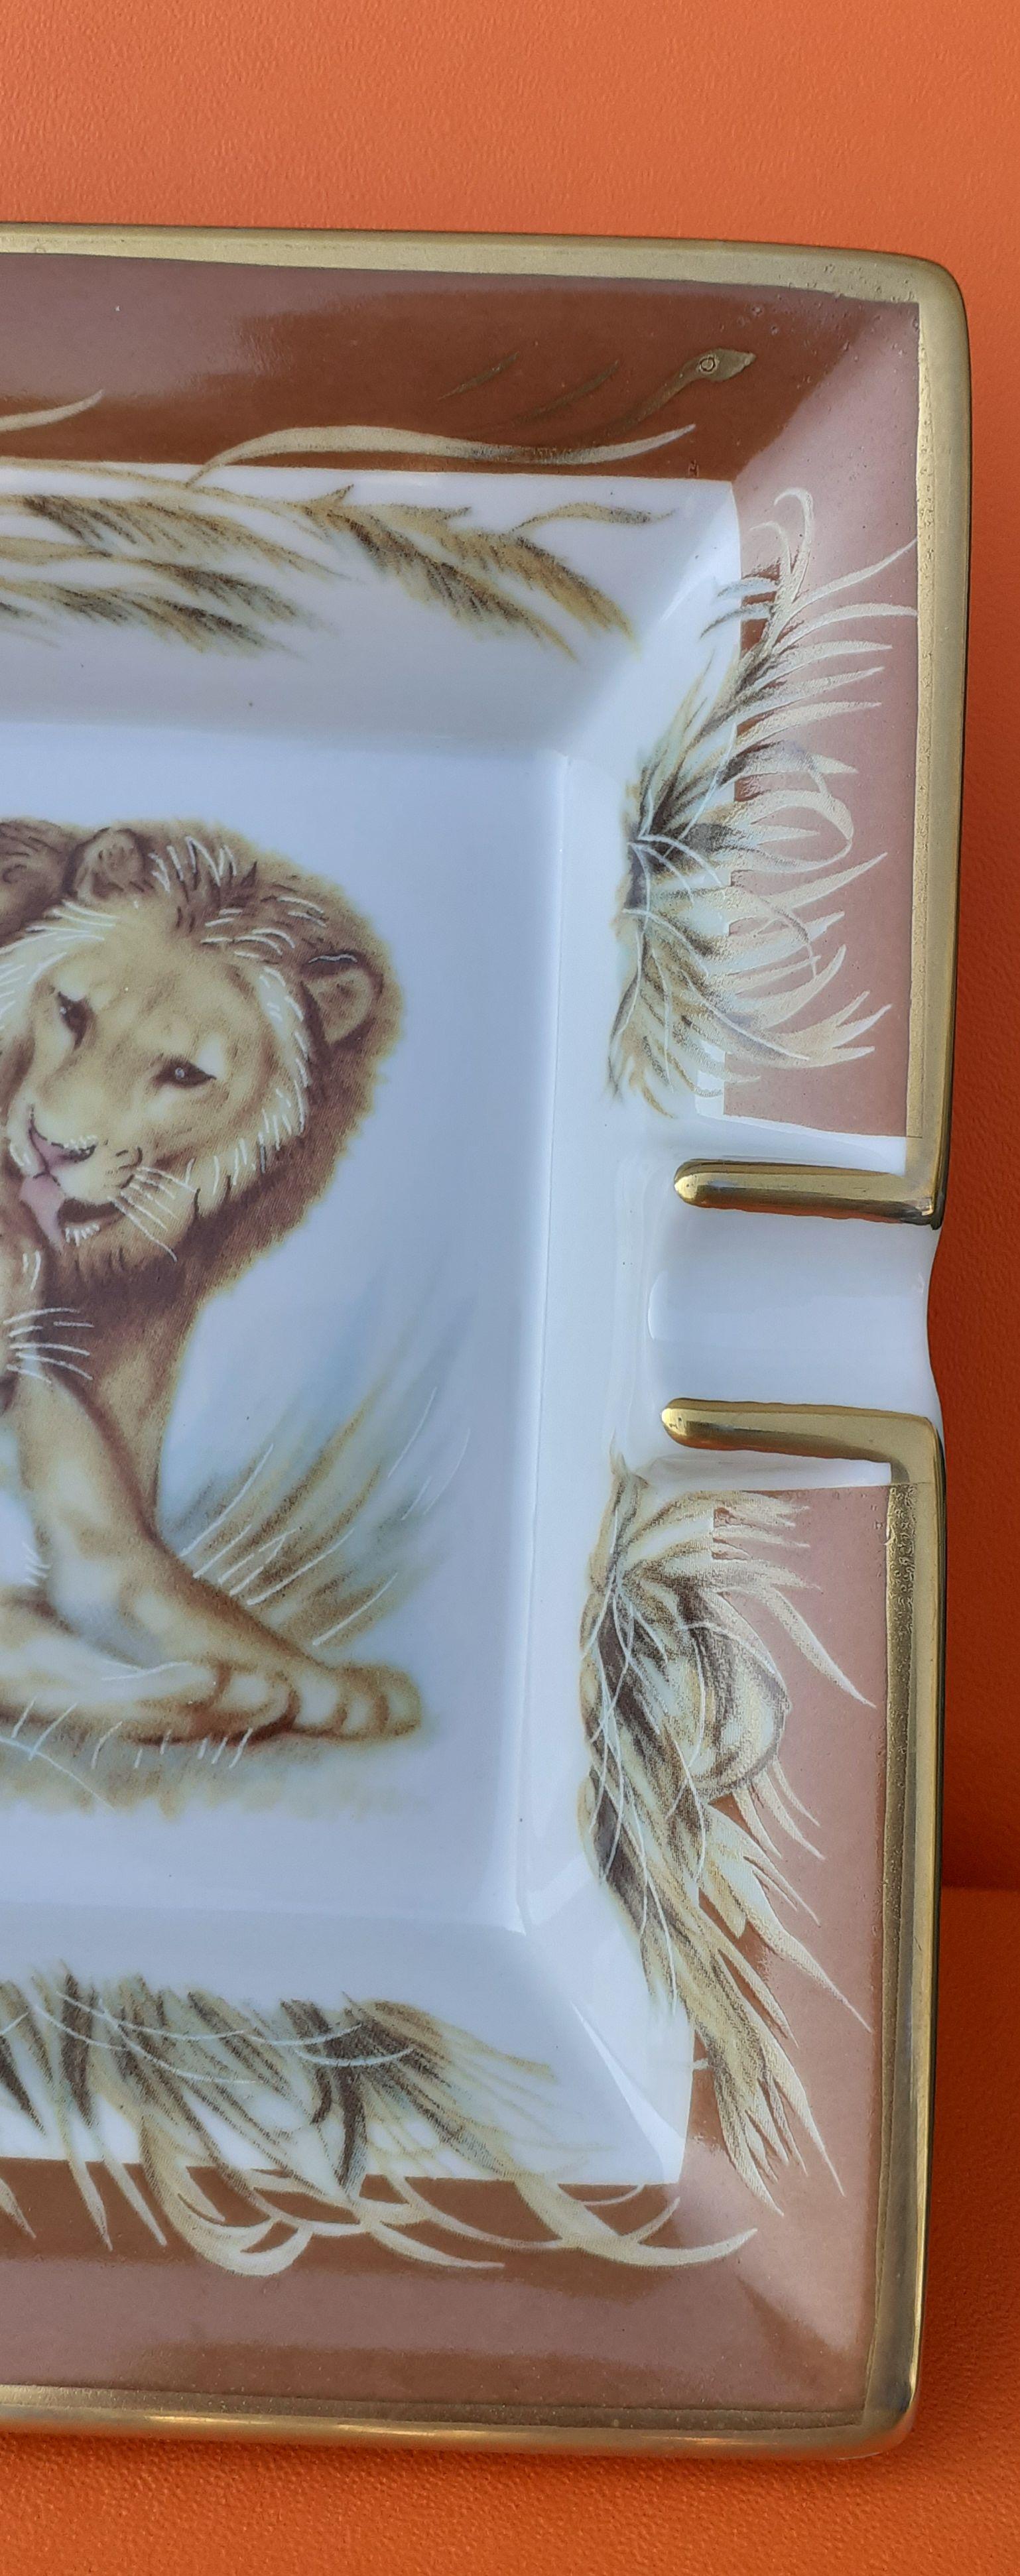 Cute Authentic Hermès Ashtray

Patter: lion and lioness in a savannah setting

Made in France

Made of Porcelain with Golden Edges

Colorways: White, Light Brown, Brown

